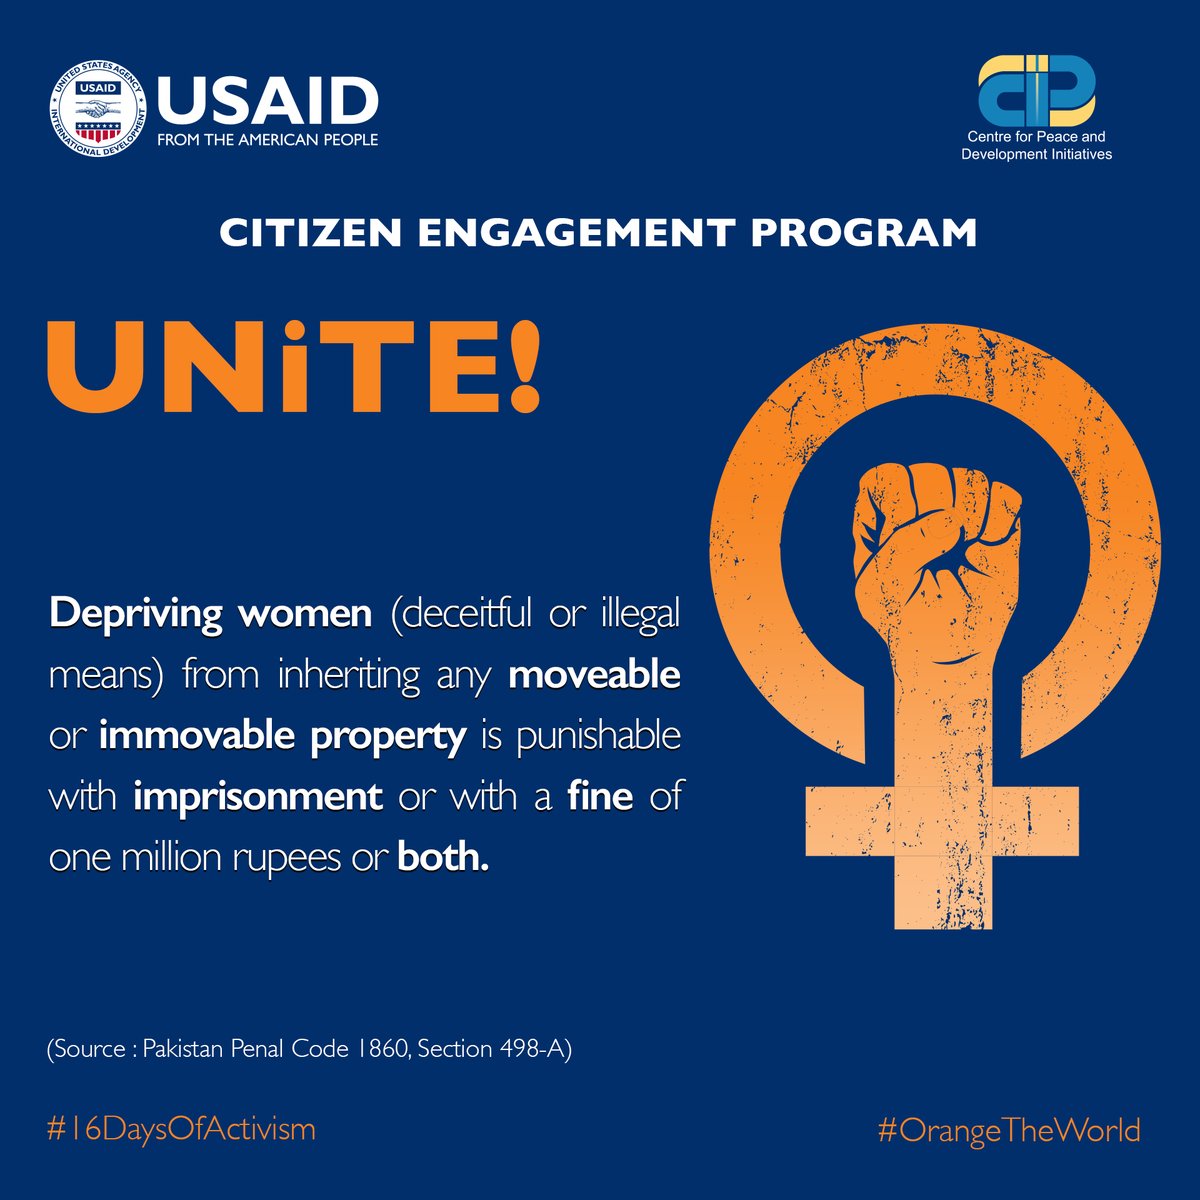 Equal rights, no compromise! Depriving women of inheritance through deceitful or illegal means is punishable by law. Let's unite for justice and equality. ⚖️ #USAID4Impact #Change4Impact #Unite4Impact #Act4Impact #EqualRights #JusticeForAll